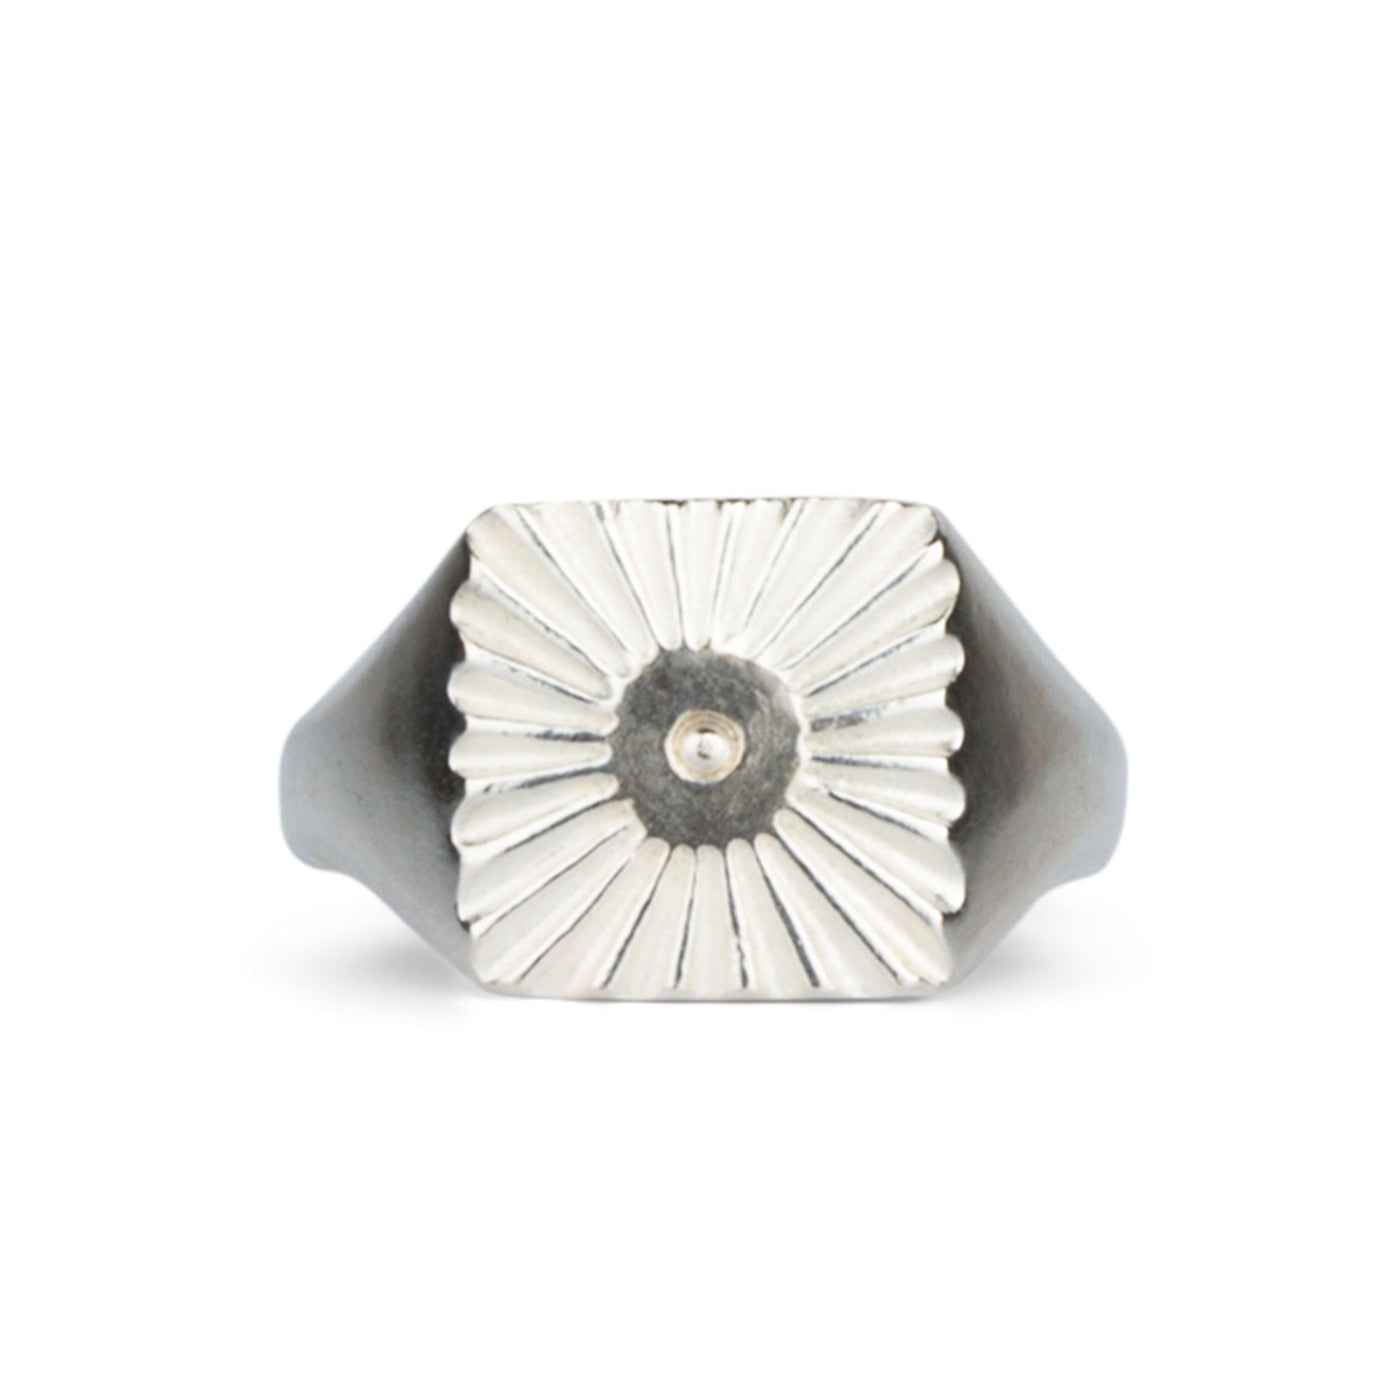 Large silver square signet ring with a carved sunburst pattern and single silver bead in the center on a white background